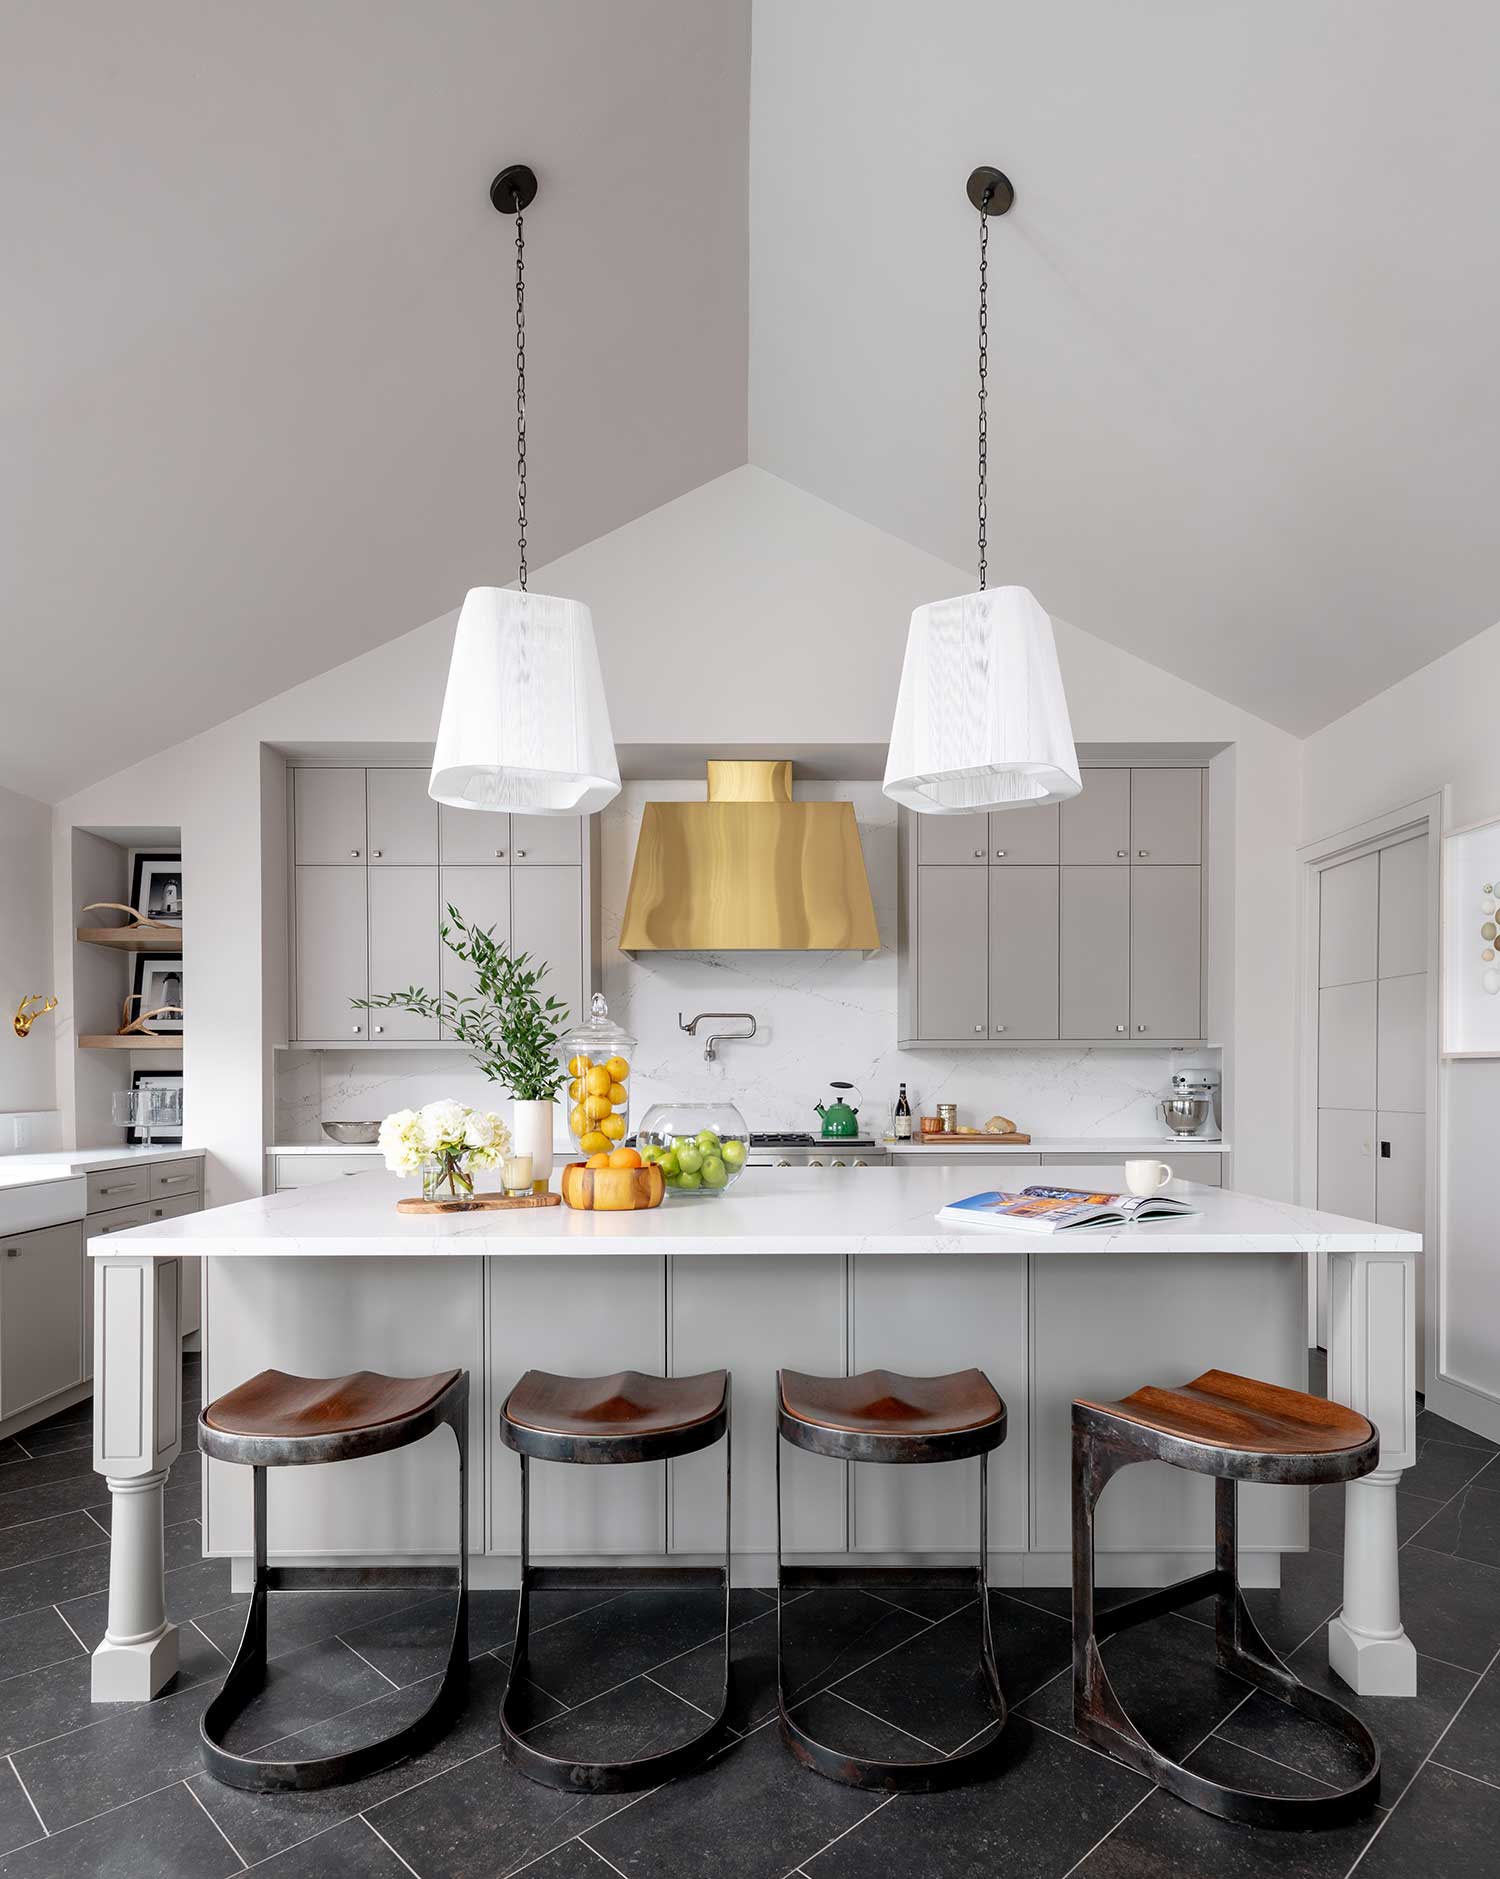 kitchen with white ceiling, gray cabinetry, black tile flooring, gold range hood, wood stools and white pendants